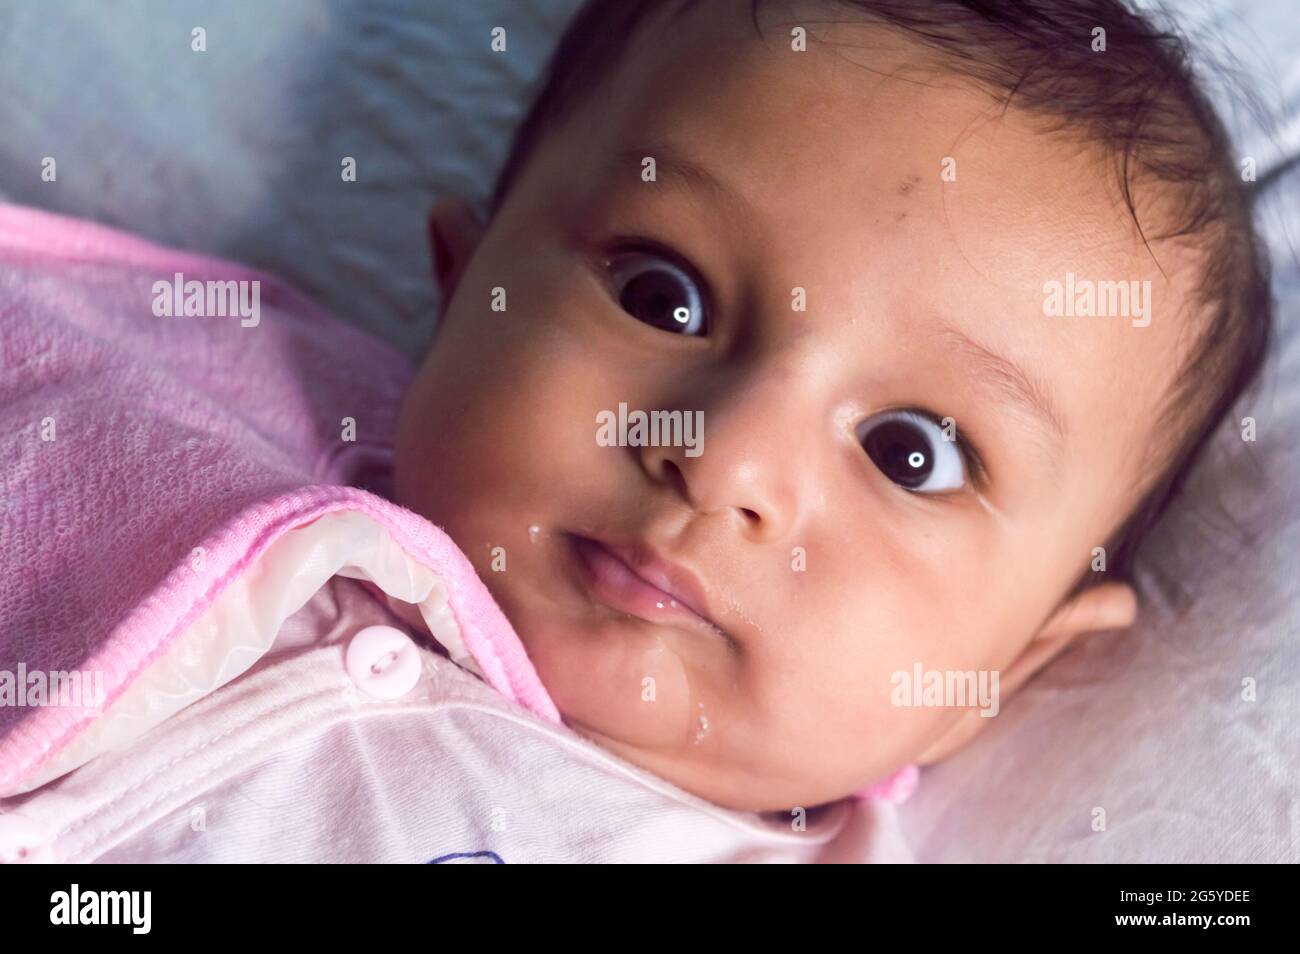 Cute baby boy wearing Baby Bib with beautiful Rolling Eyes lying on bed posing smiling and looking at camera. Sweet little infant toddler Closeup port Stock Photo